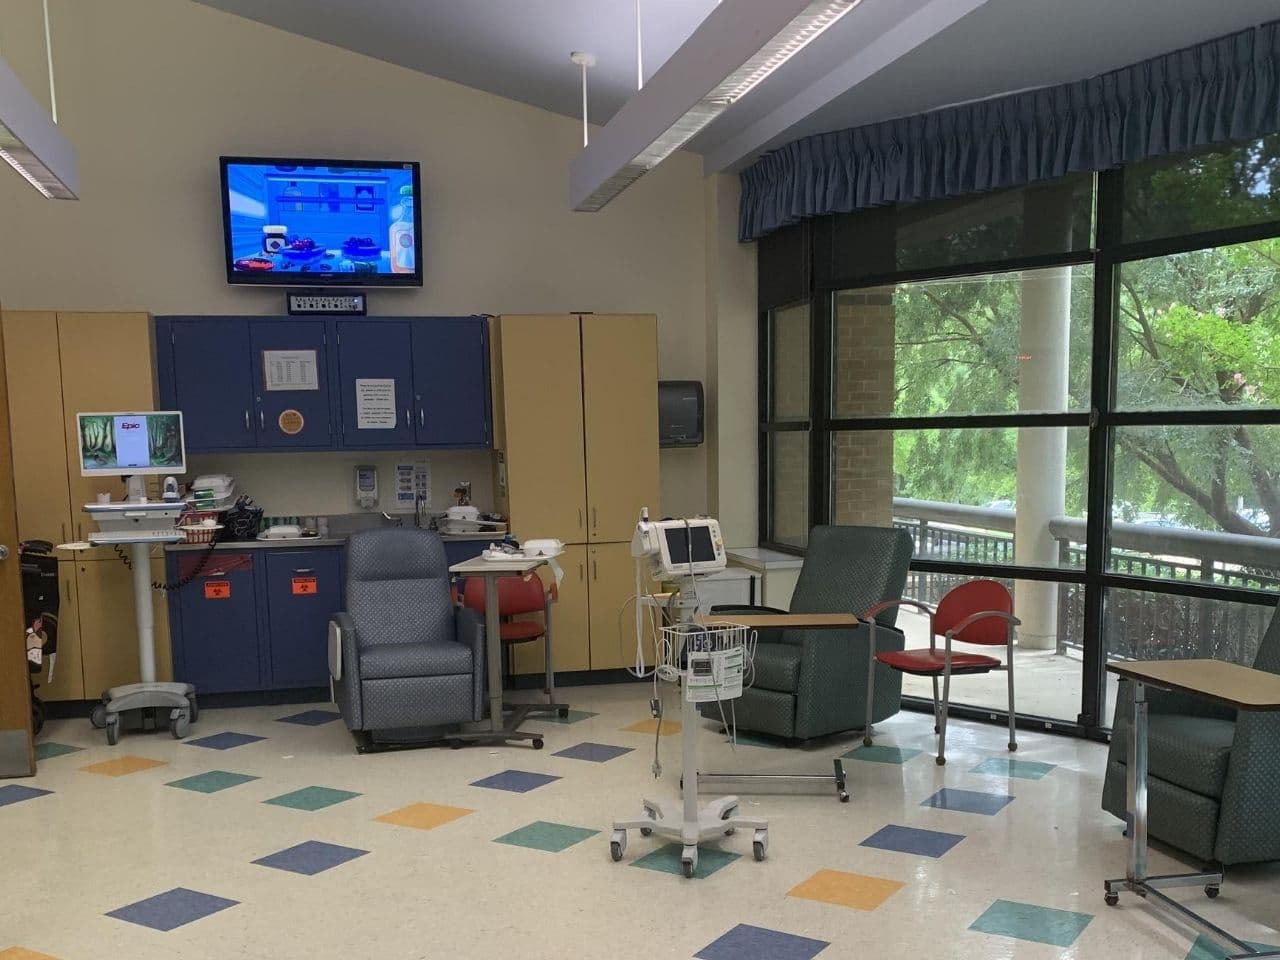 The infusion area has big windows that let in lots of natural light; colorful tiles on the floor, a flatscreen TV mounted on the wall, and several infusion recliners.